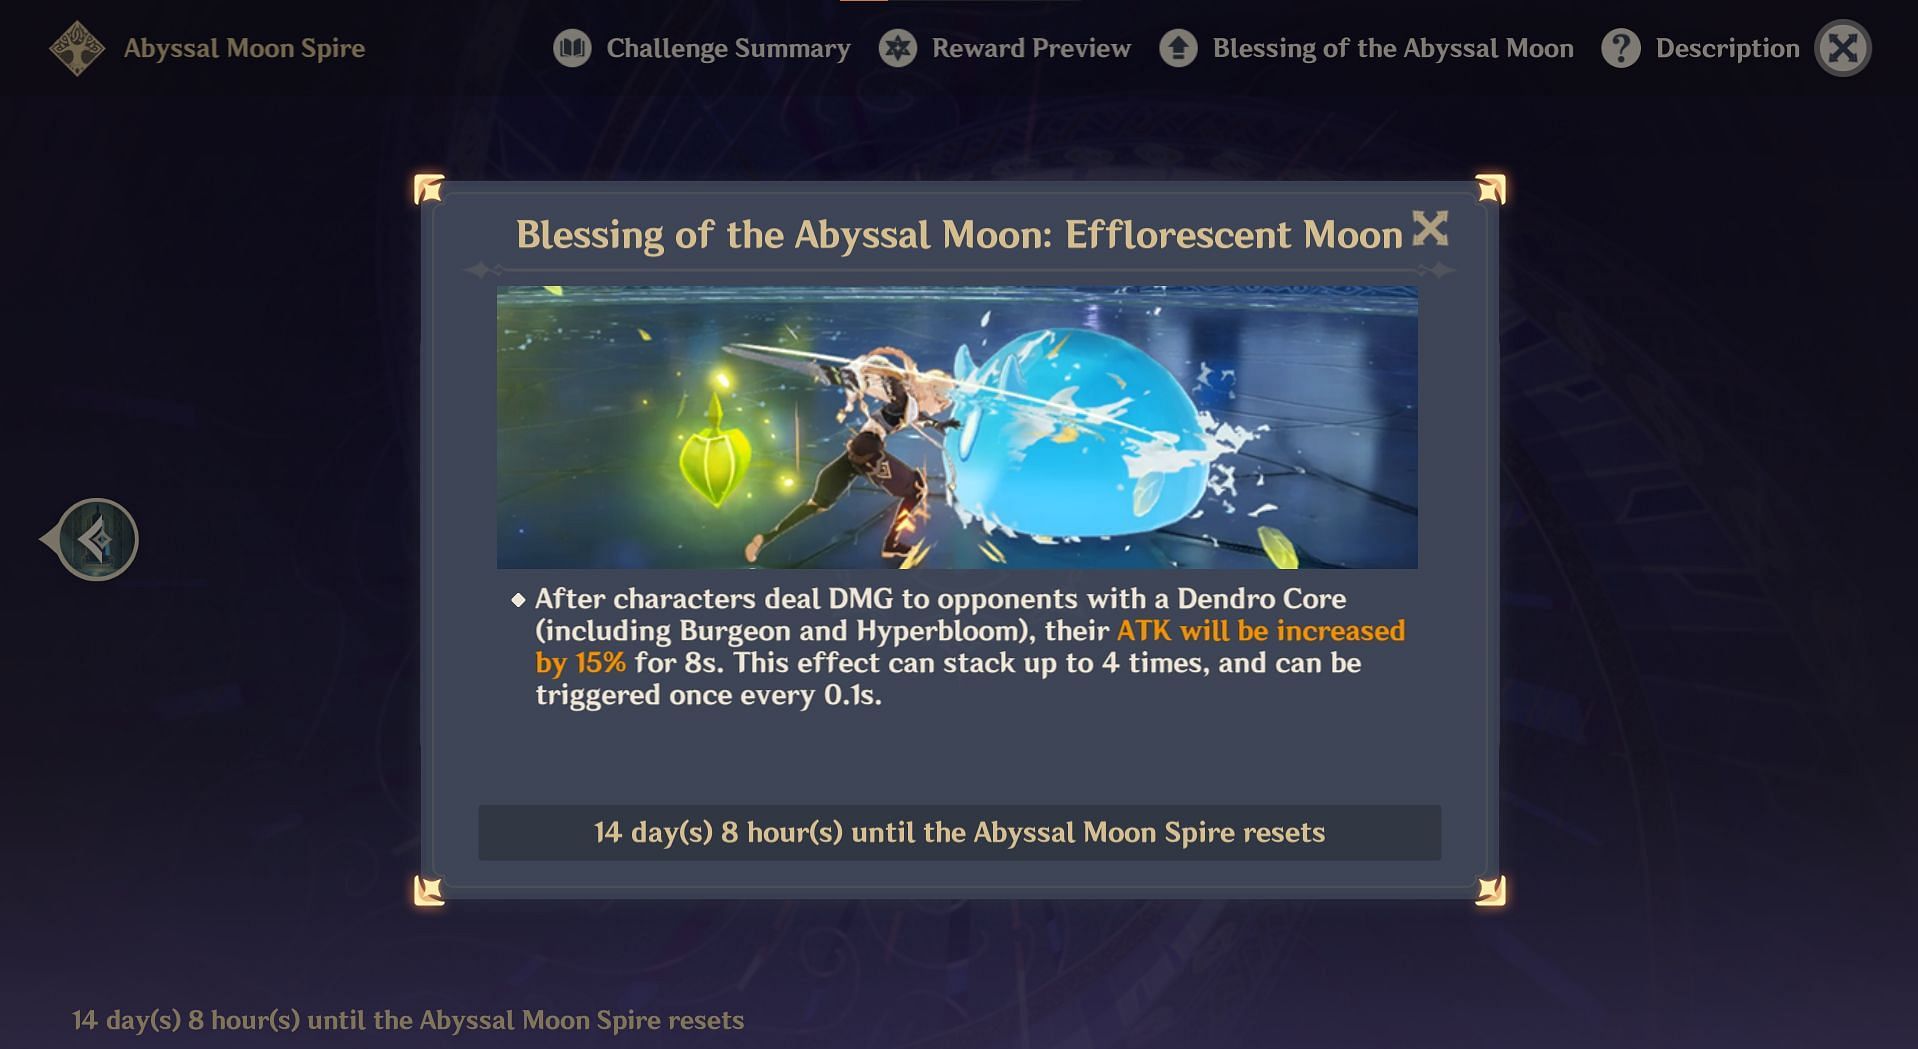 Blessing of the Abyssal Moon: Efflorescent Moon (Image via HoYoverse)